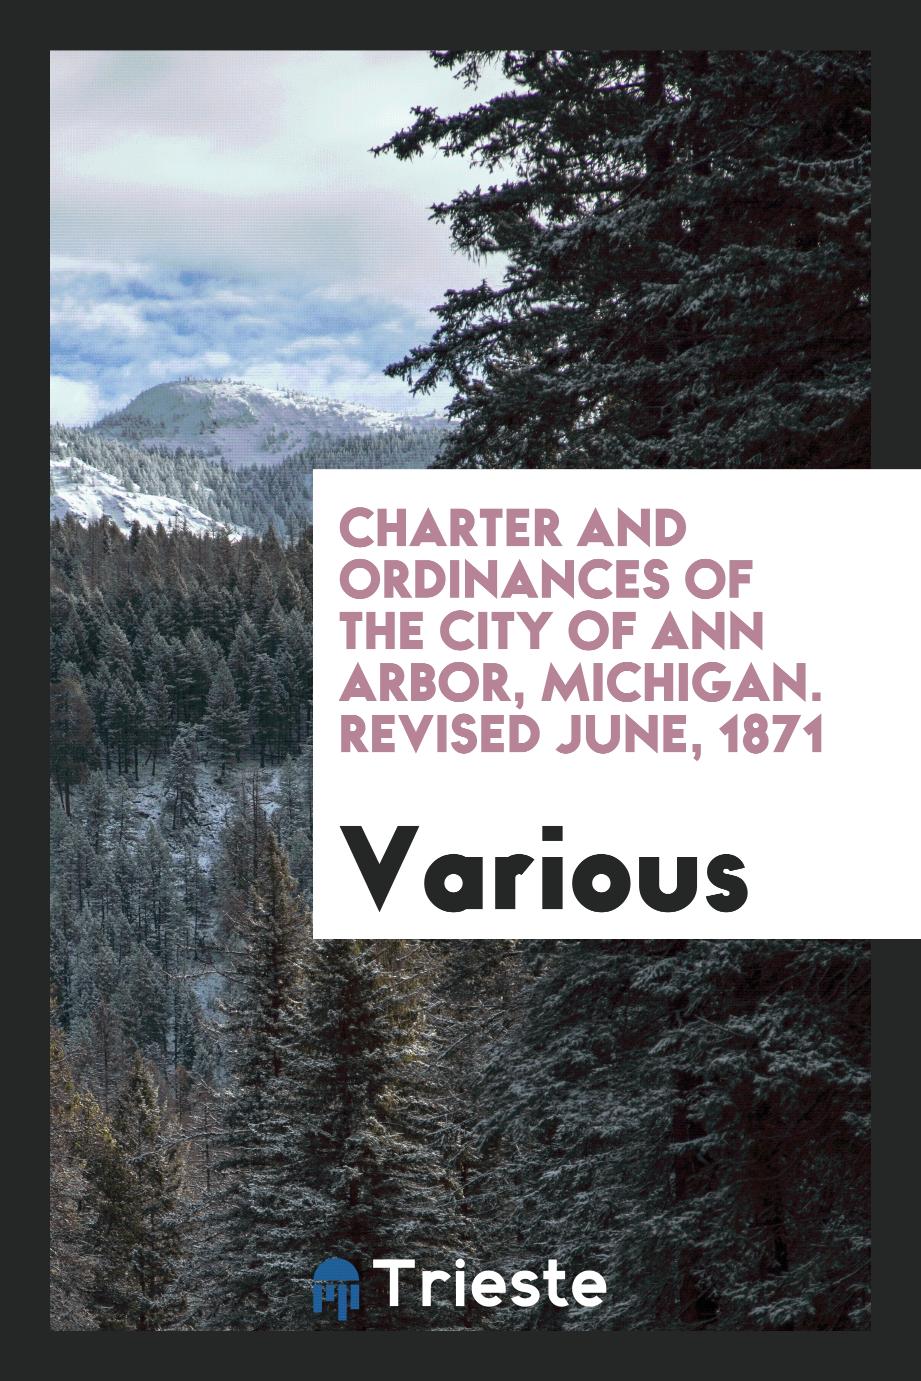 Charter and Ordinances of the City of Ann Arbor, Michigan. Revised June, 1871